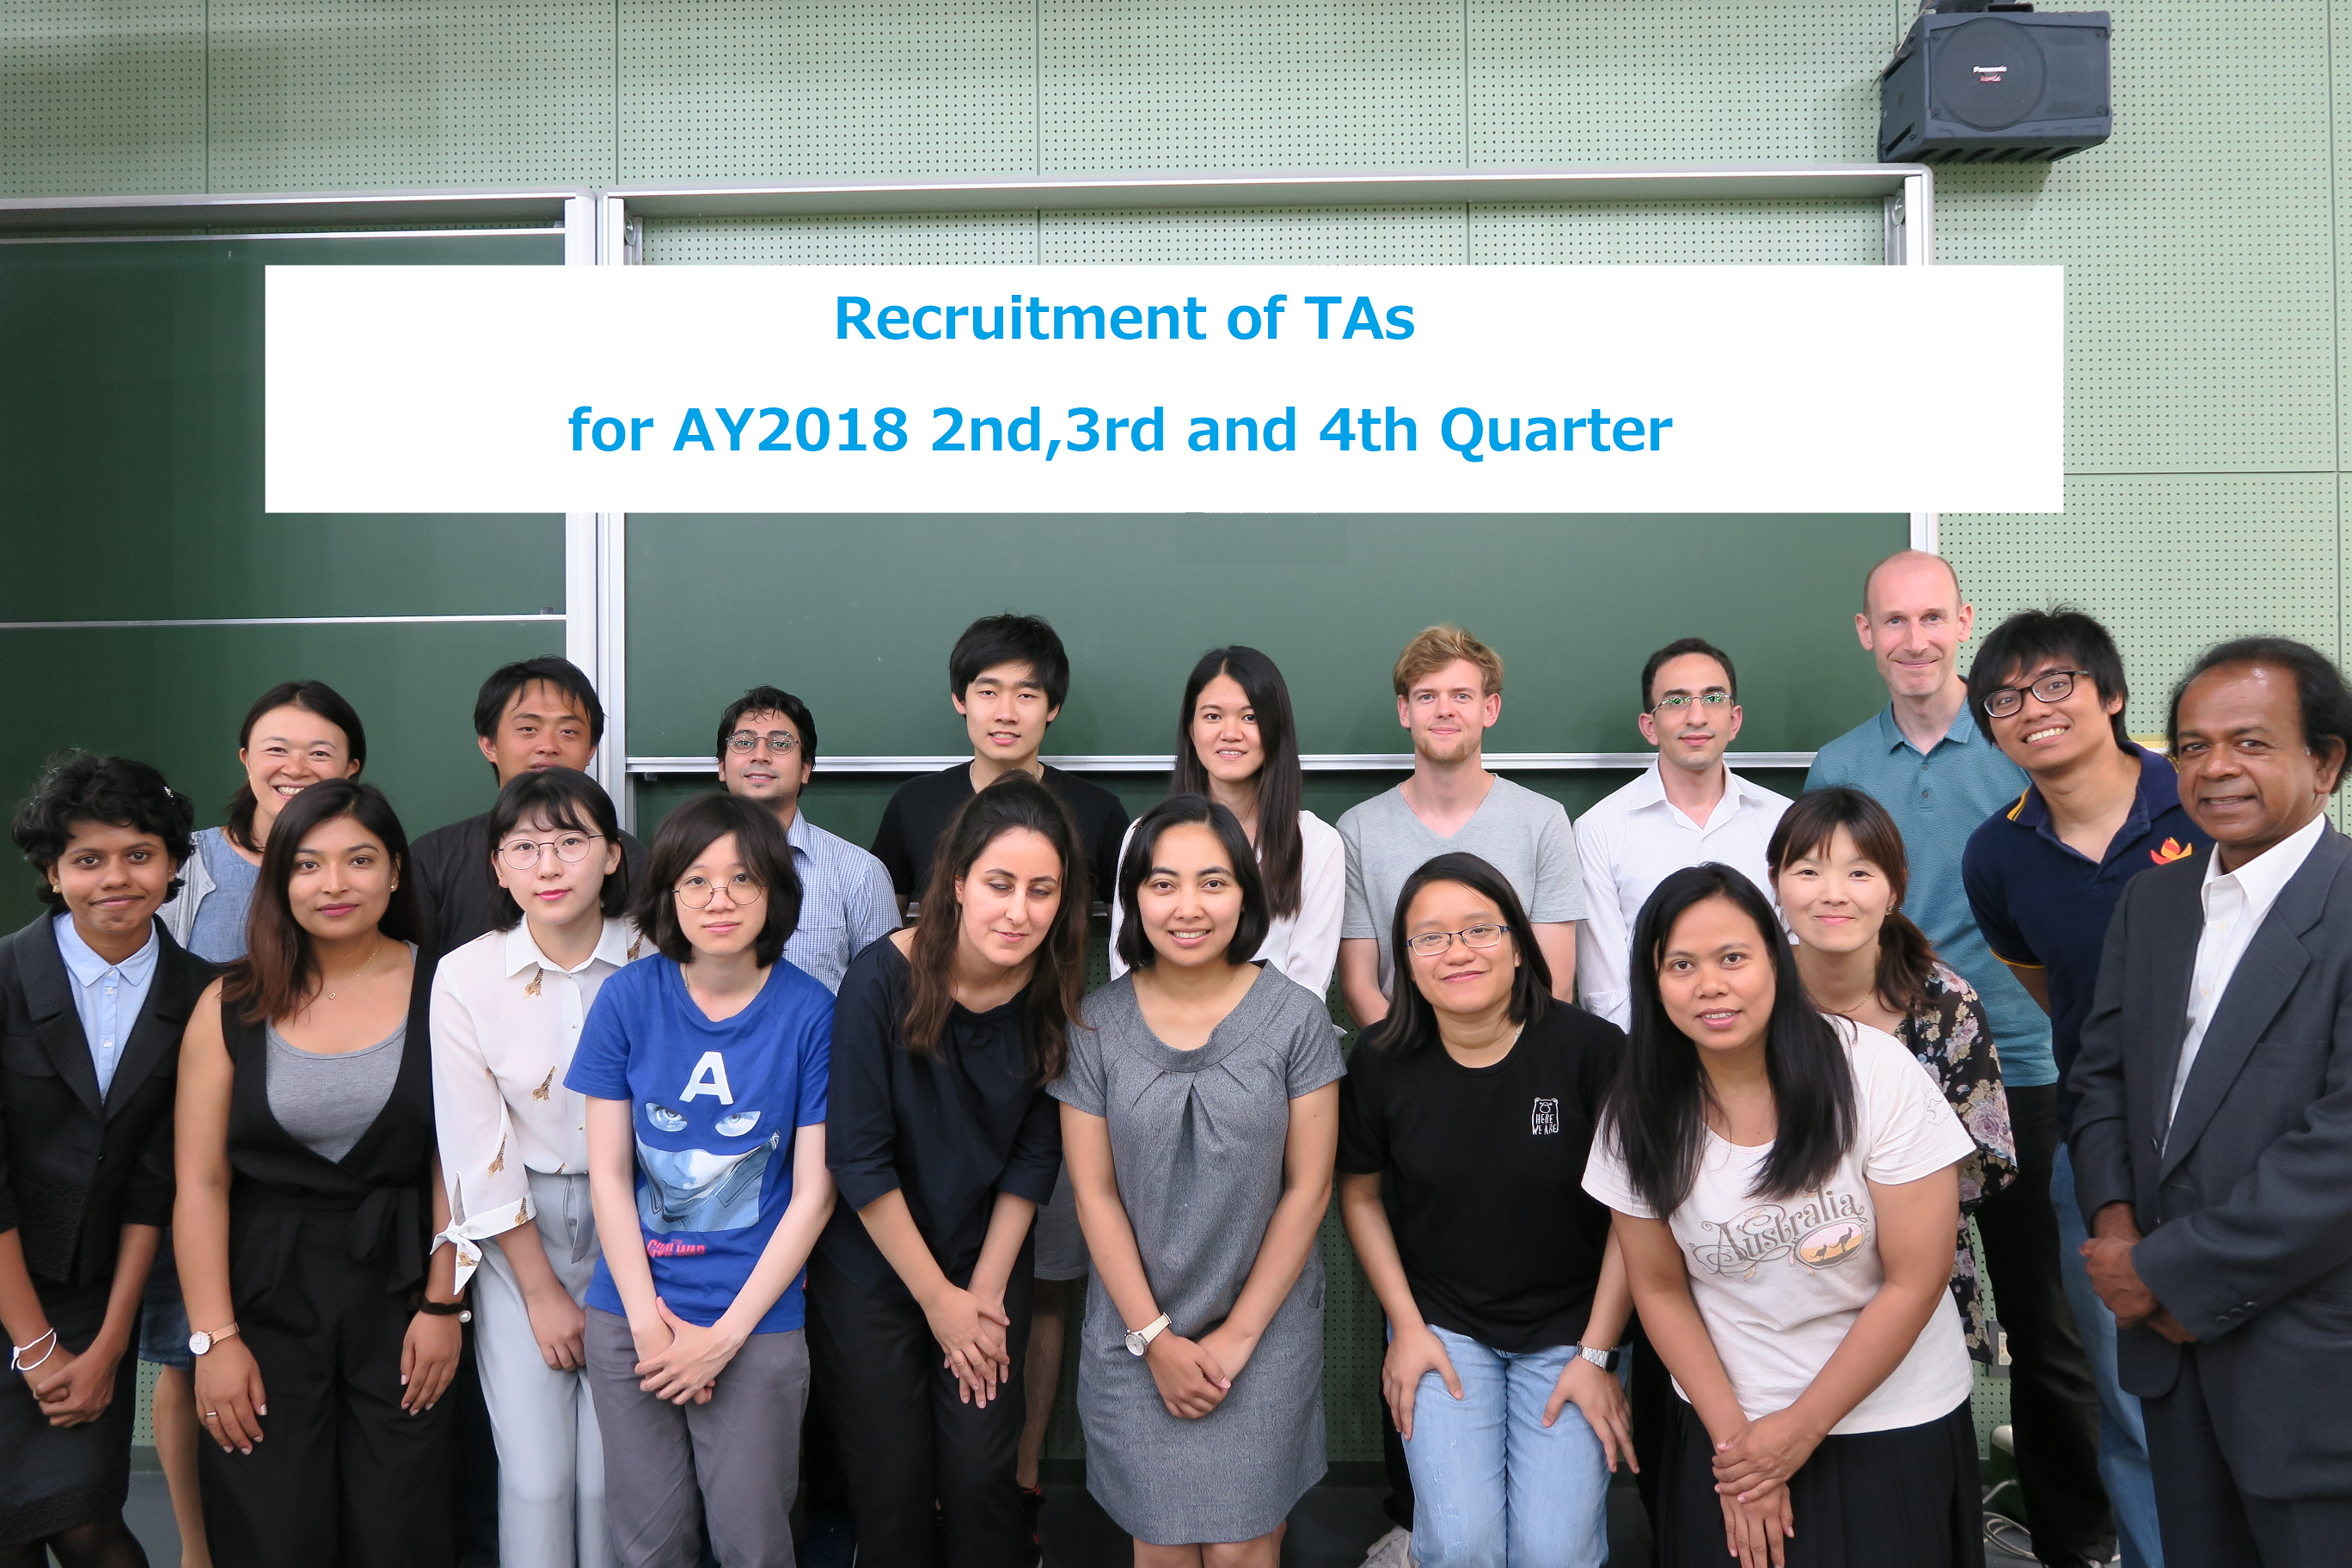 Recruitment of TAs for AY2018 2nd,3rd and 4th Quarter